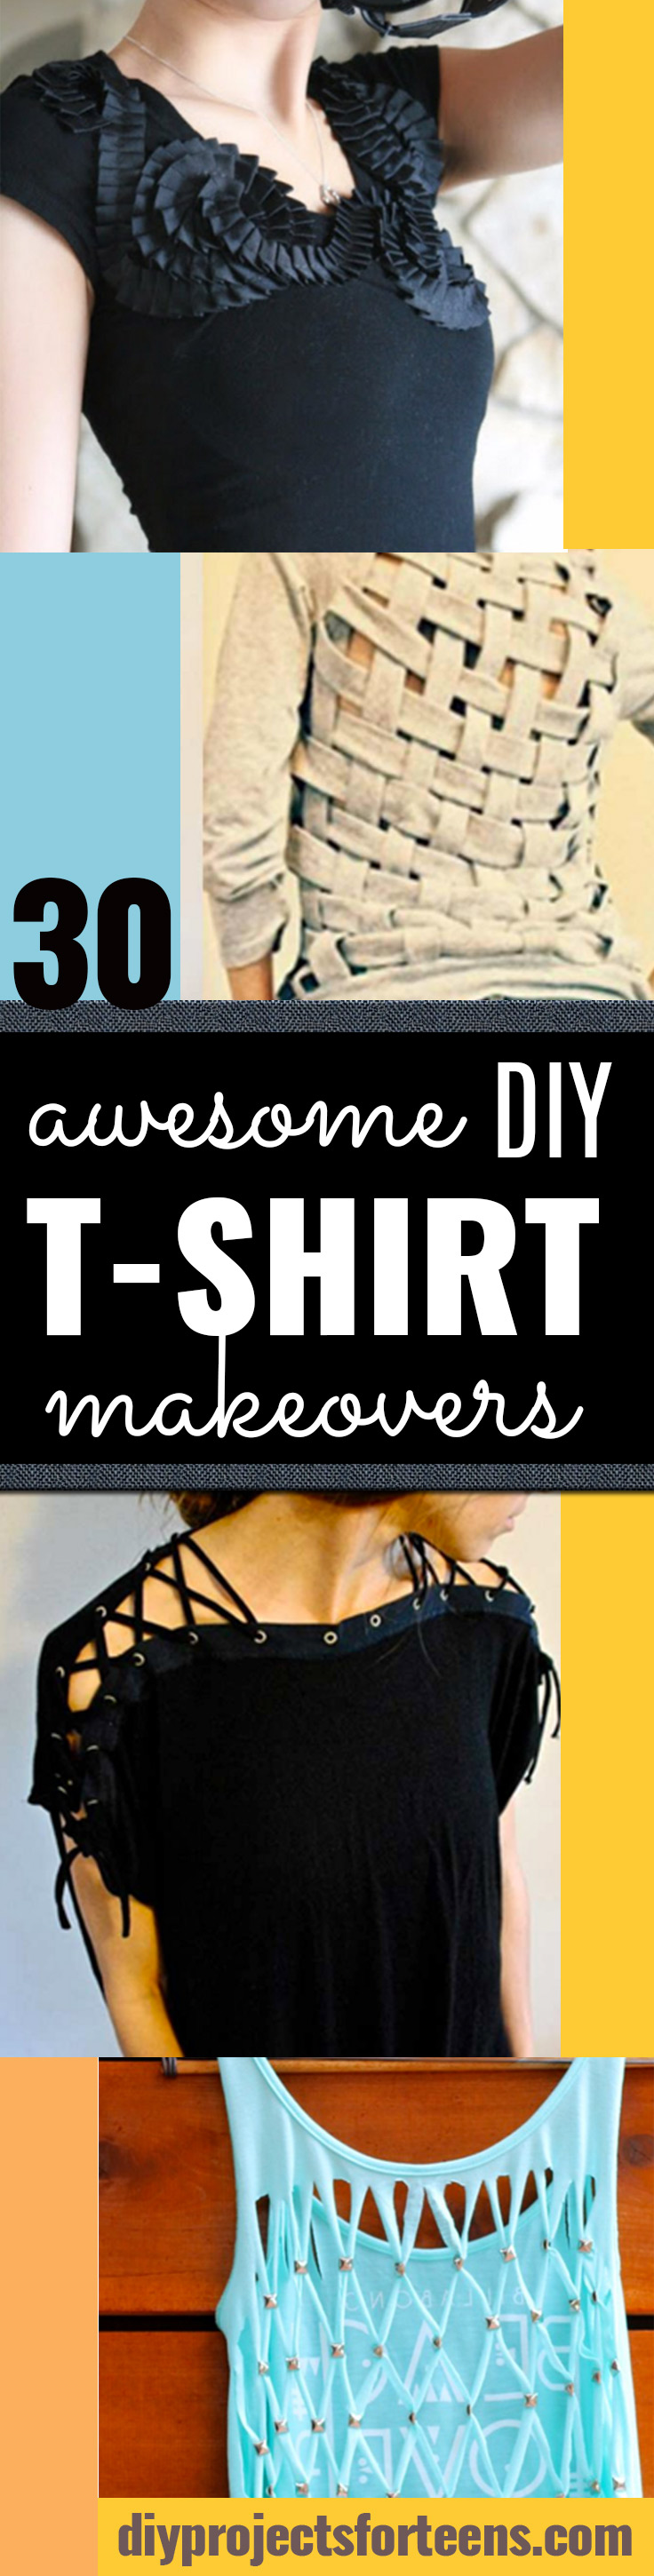 DIY T-Shirt Makeovers - Awesome Way to Upcycle Tees - Cool No Sew Tshirt Cutting Tutorials, Simple Summer Cutouts, How To Make Halter Tops and T-Shirt Dresses. Easy Tutorials and Instructions for Teens and Adults #tshircrafts #teenclothes #teenfashion #teendiy #teencrafts